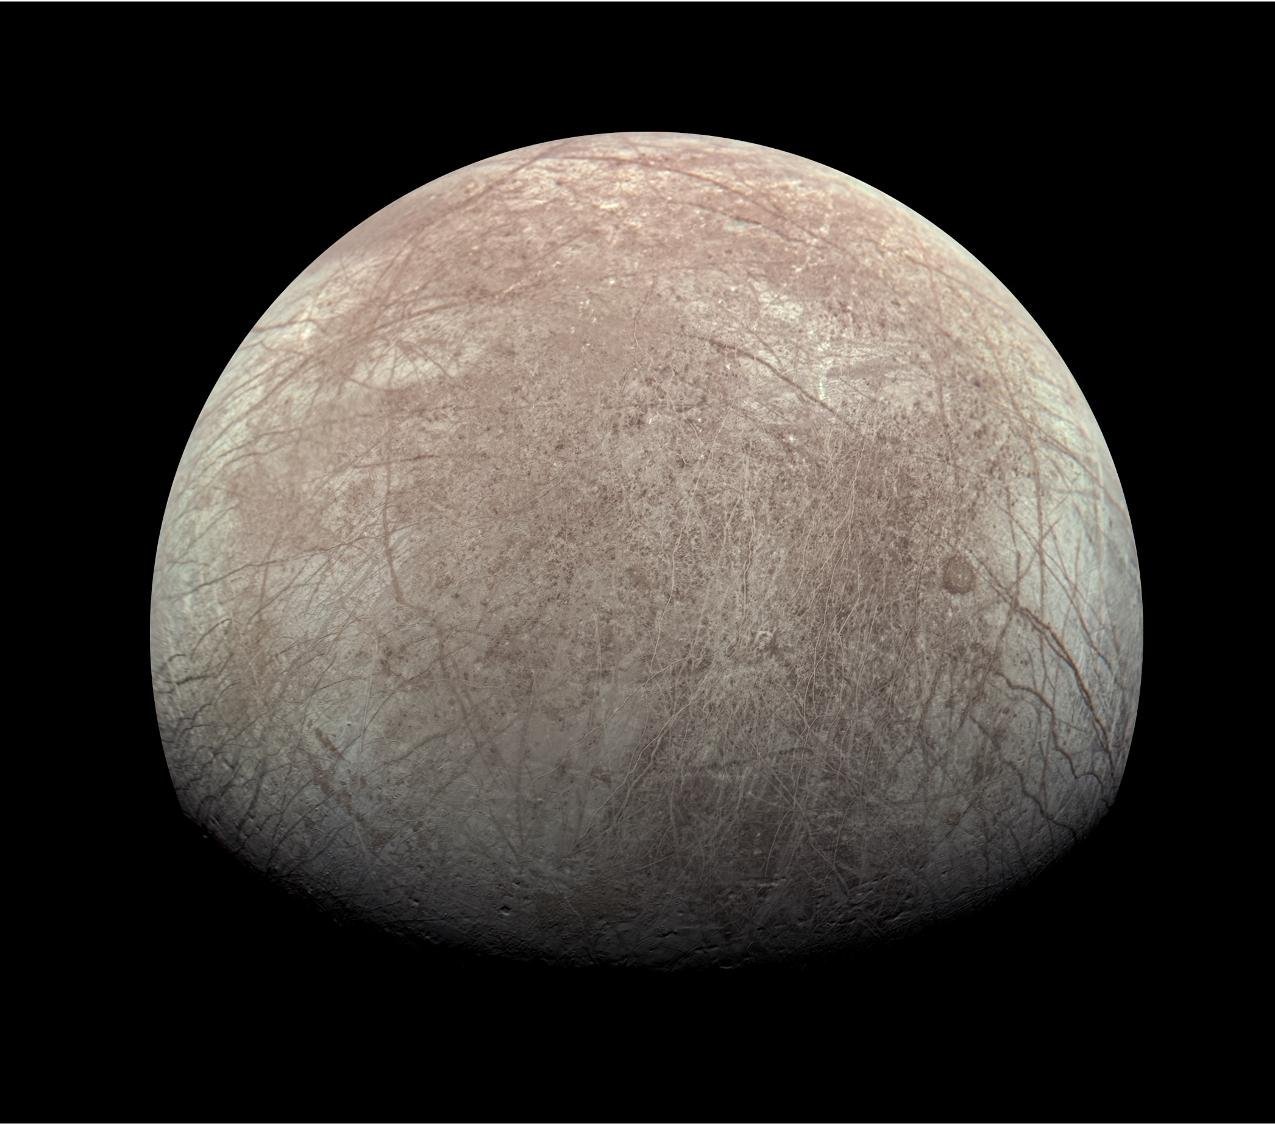 This view of Jupiter’s icy moon Europa was captured by the JunoCam imager aboard NASA’s Juno spacecraft during the mission’s close flyby on Sept. 29, 2022. The agency’s Europa Clipper spacecraft will explore the moon when it reaches orbit around Jupiter in 2030. Credit: Image data: NASA/JPL-Caltech/SwRI/MSSSImage processing: Kevin M. Gill CC BY 3.0